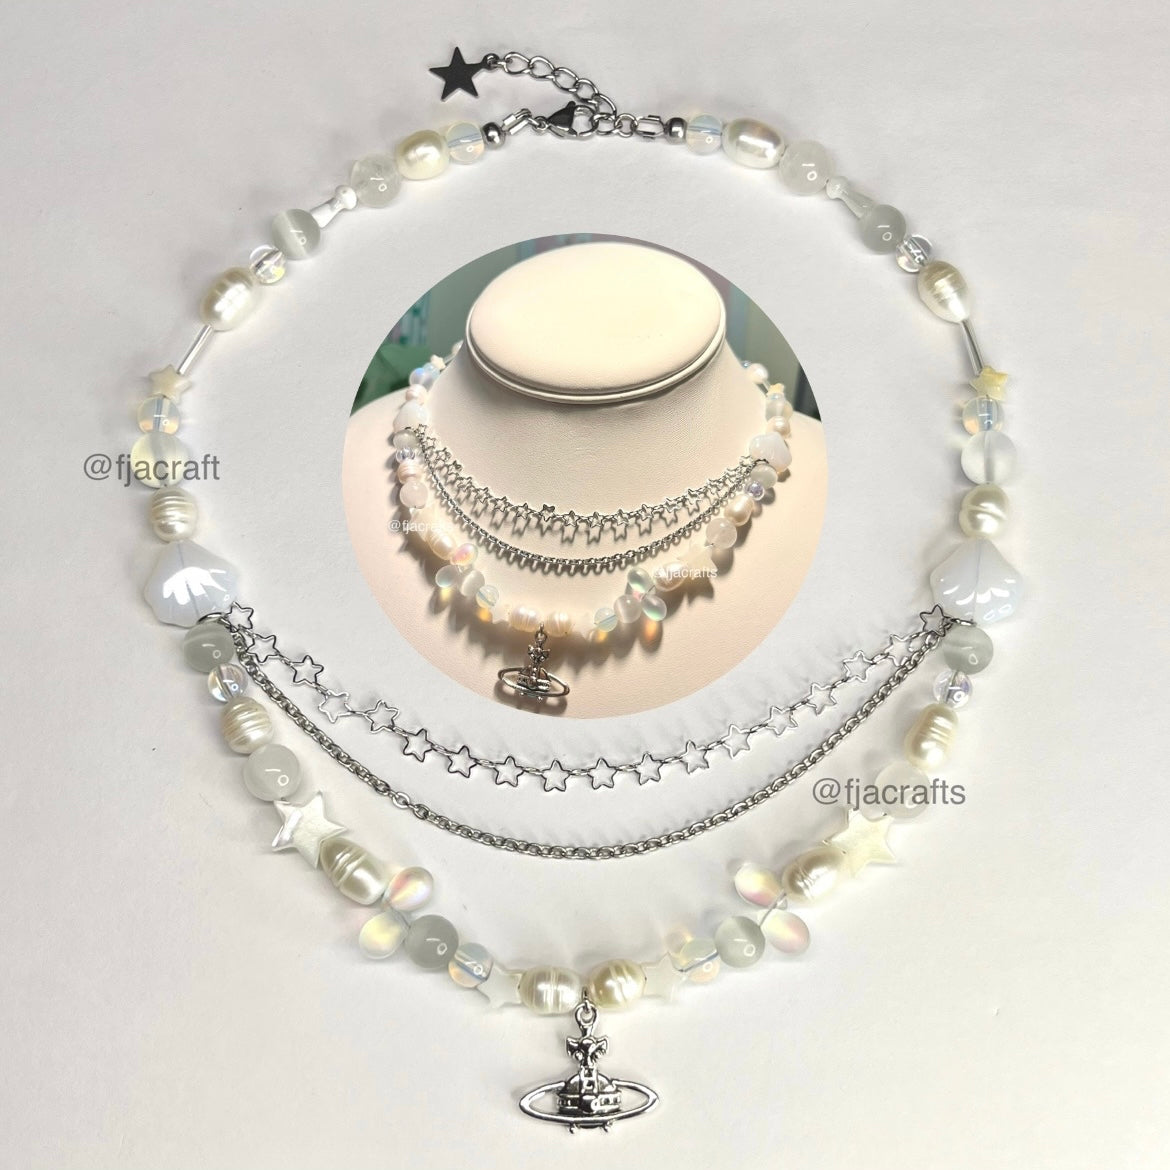 West Star Pearl Necklace | stars, chains | freshwater iridescent pearlescent white gray FJA Crafts